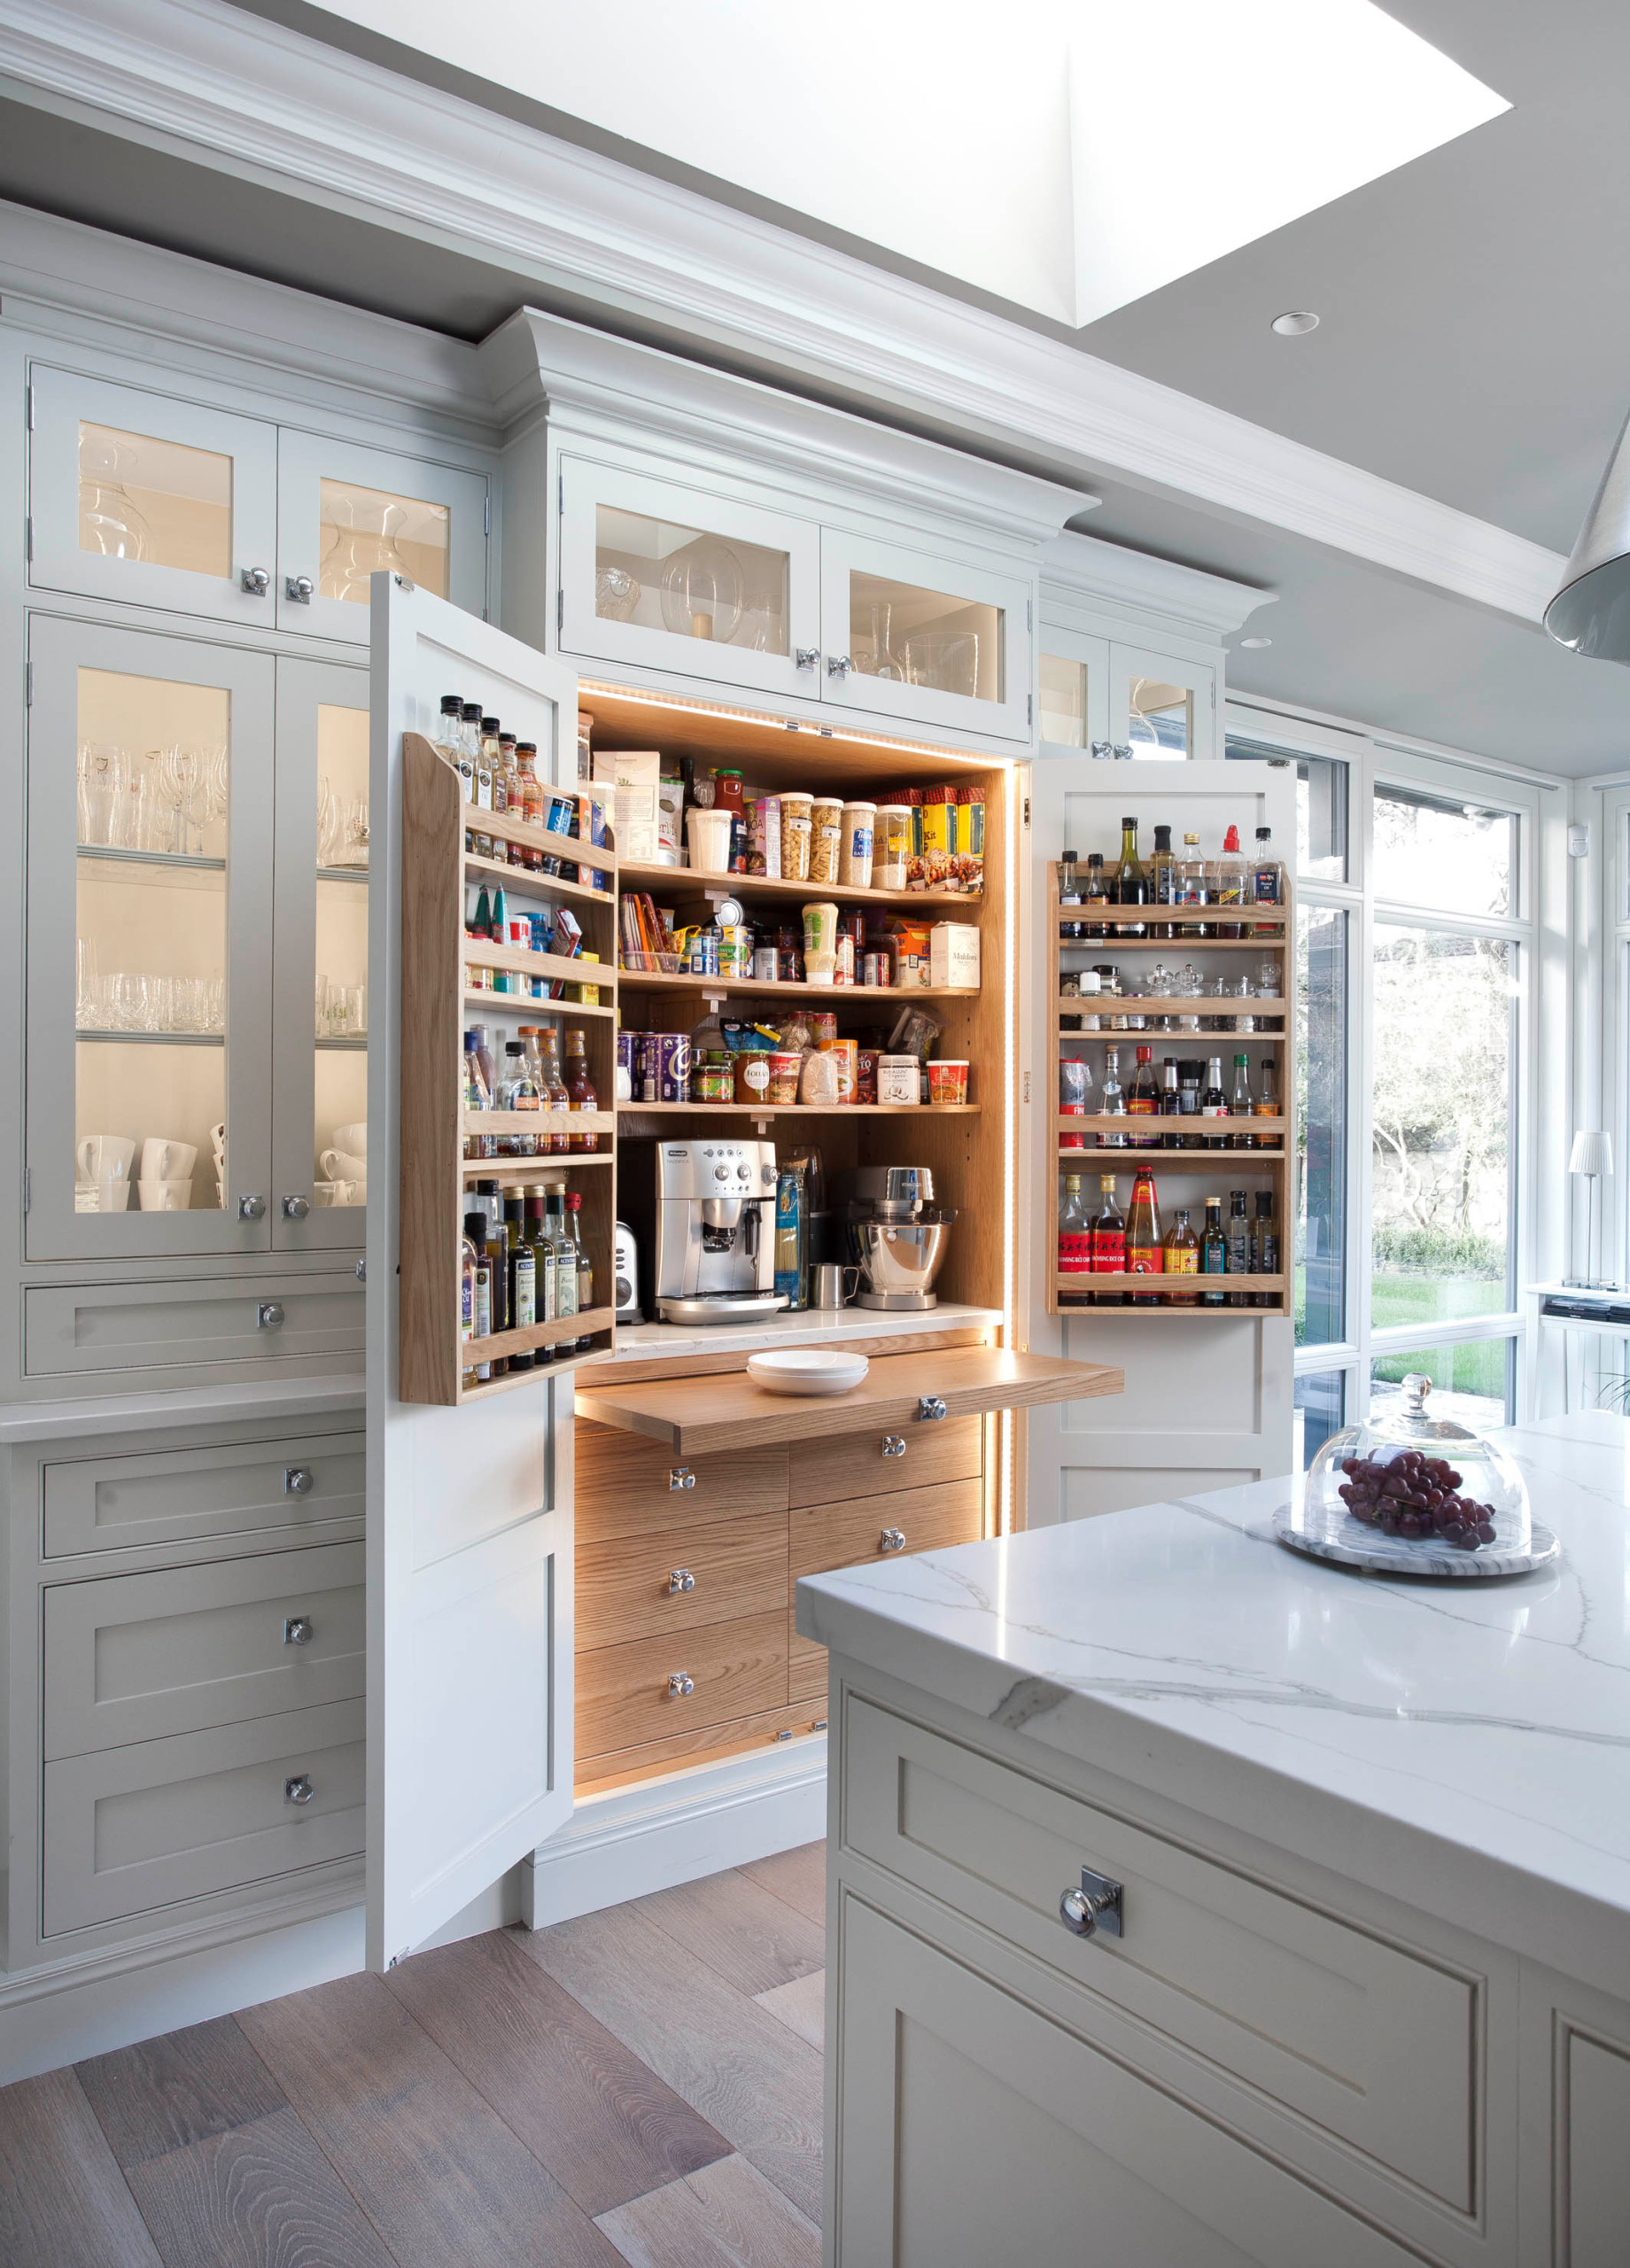 Traditional kitchen cabinet with pantry built into it